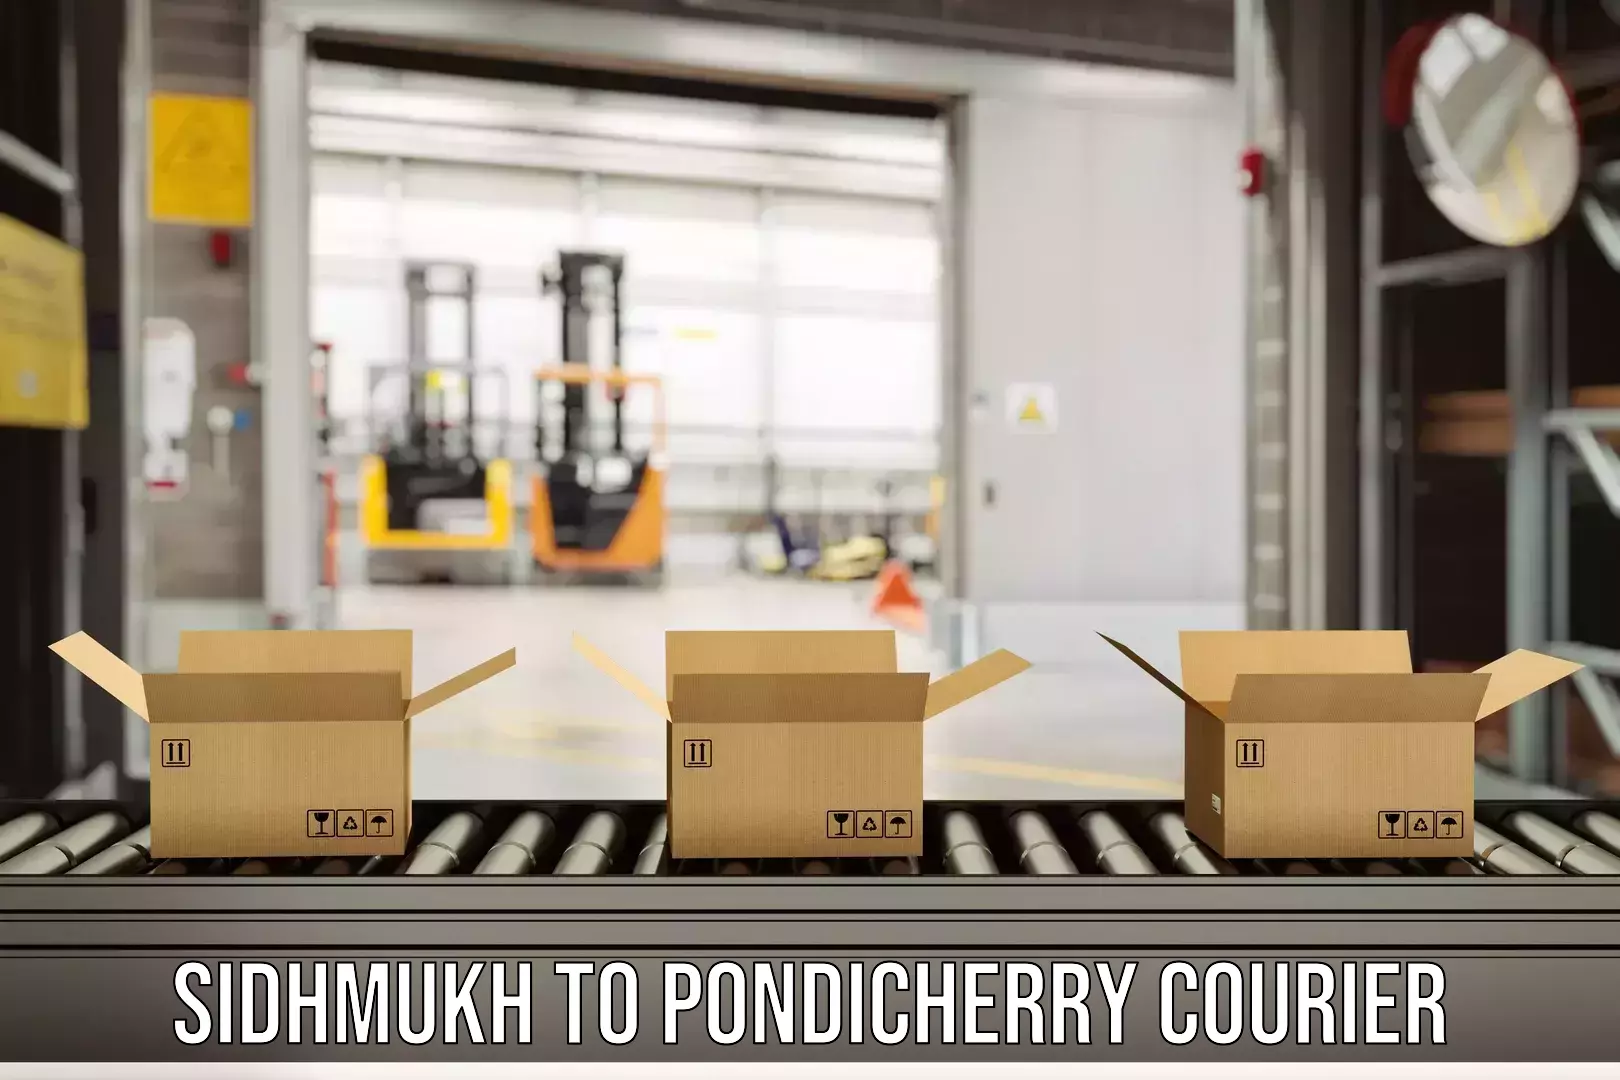 Subscription-based courier Sidhmukh to Pondicherry University